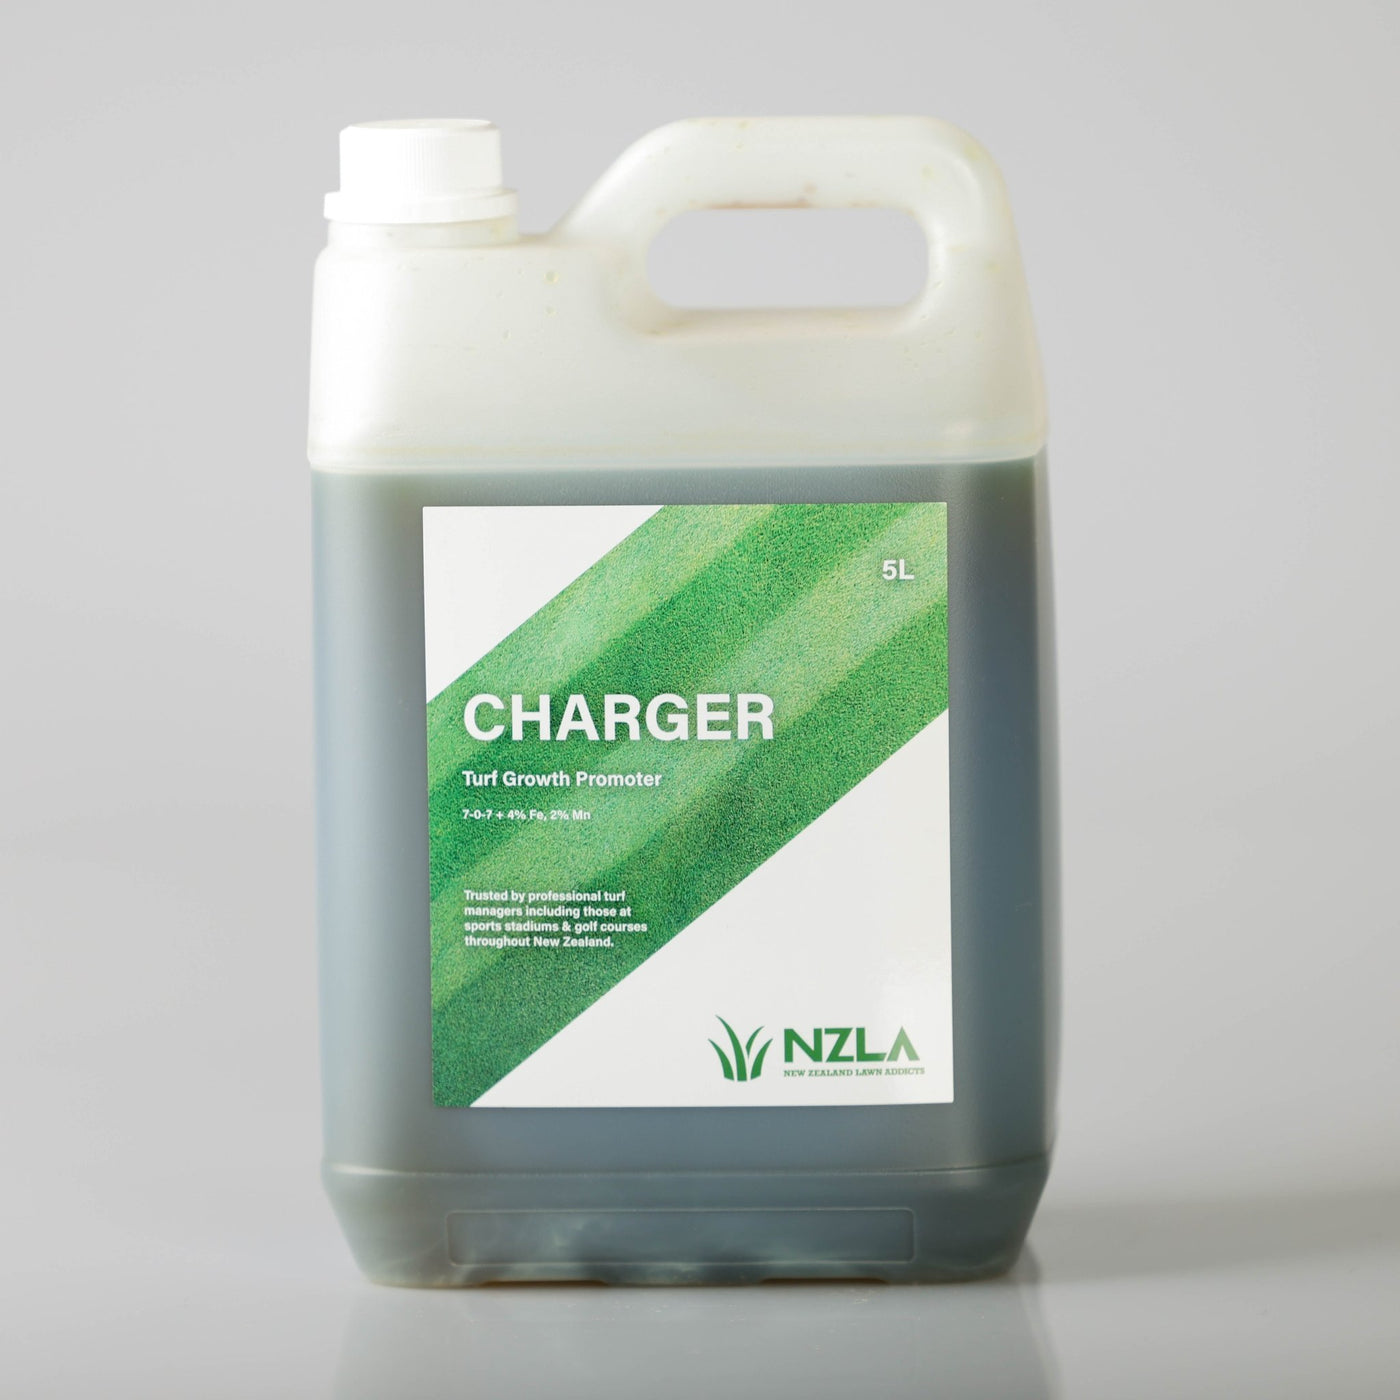 Charger Growth Promoter 5L - Solo New Zealand